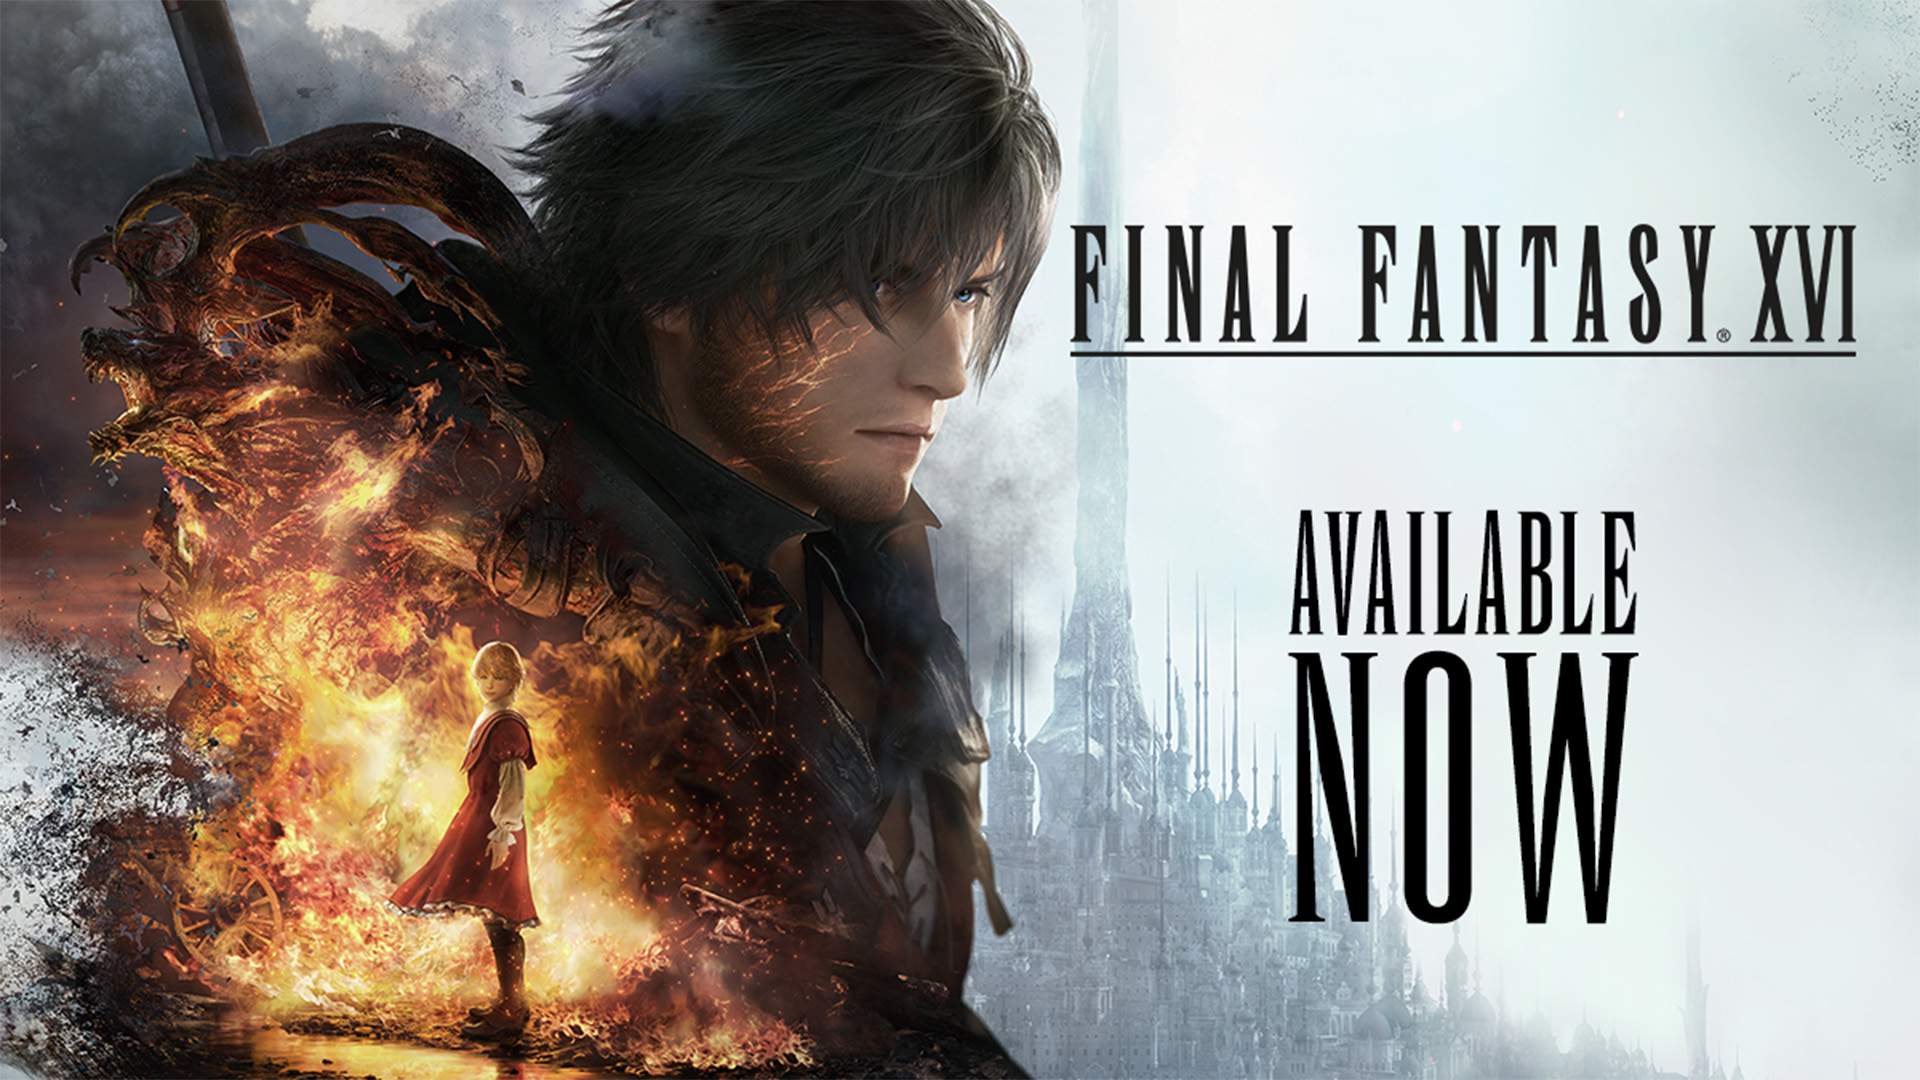 SQUARE ENIX  The Official SQUARE ENIX Website - FINAL FANTASY XVI is  available now - Try the demo for free!